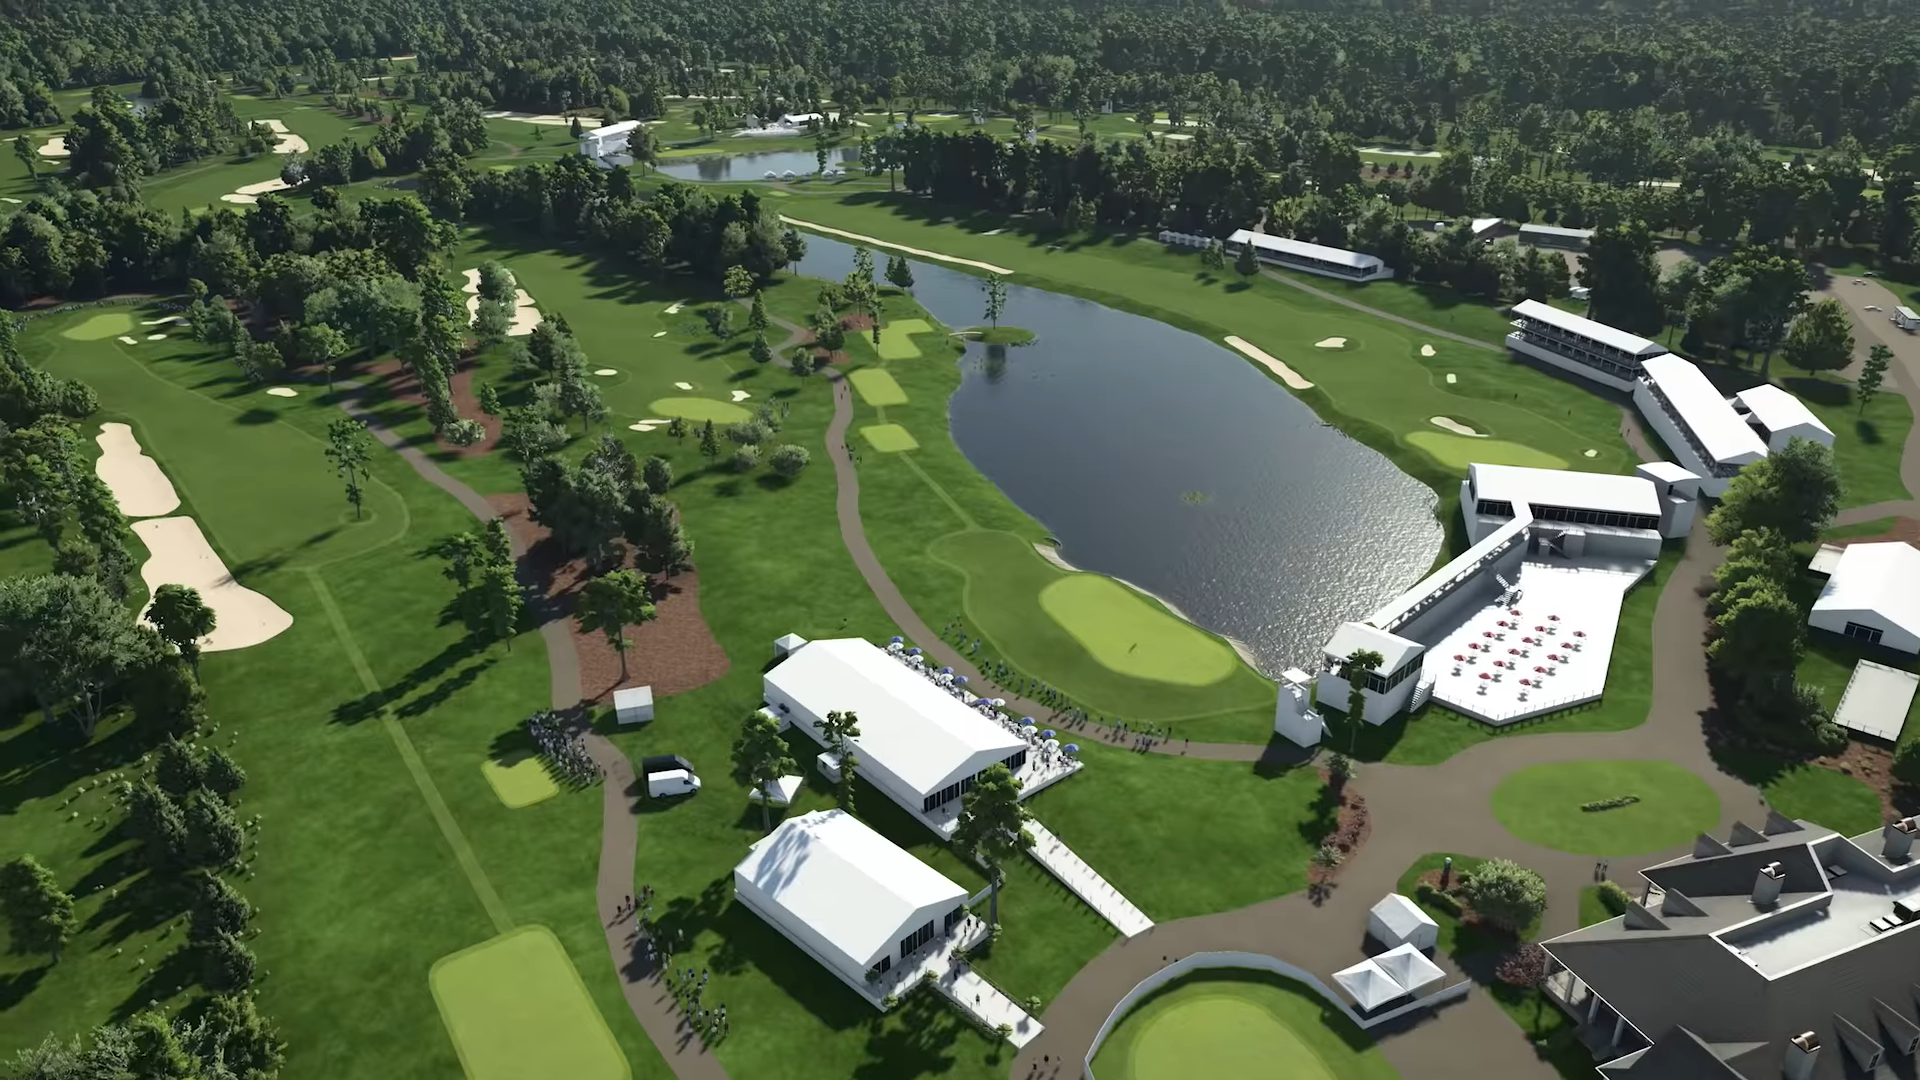  Will all consoles have access to PGA Tour 2K21’s Course Designer? 